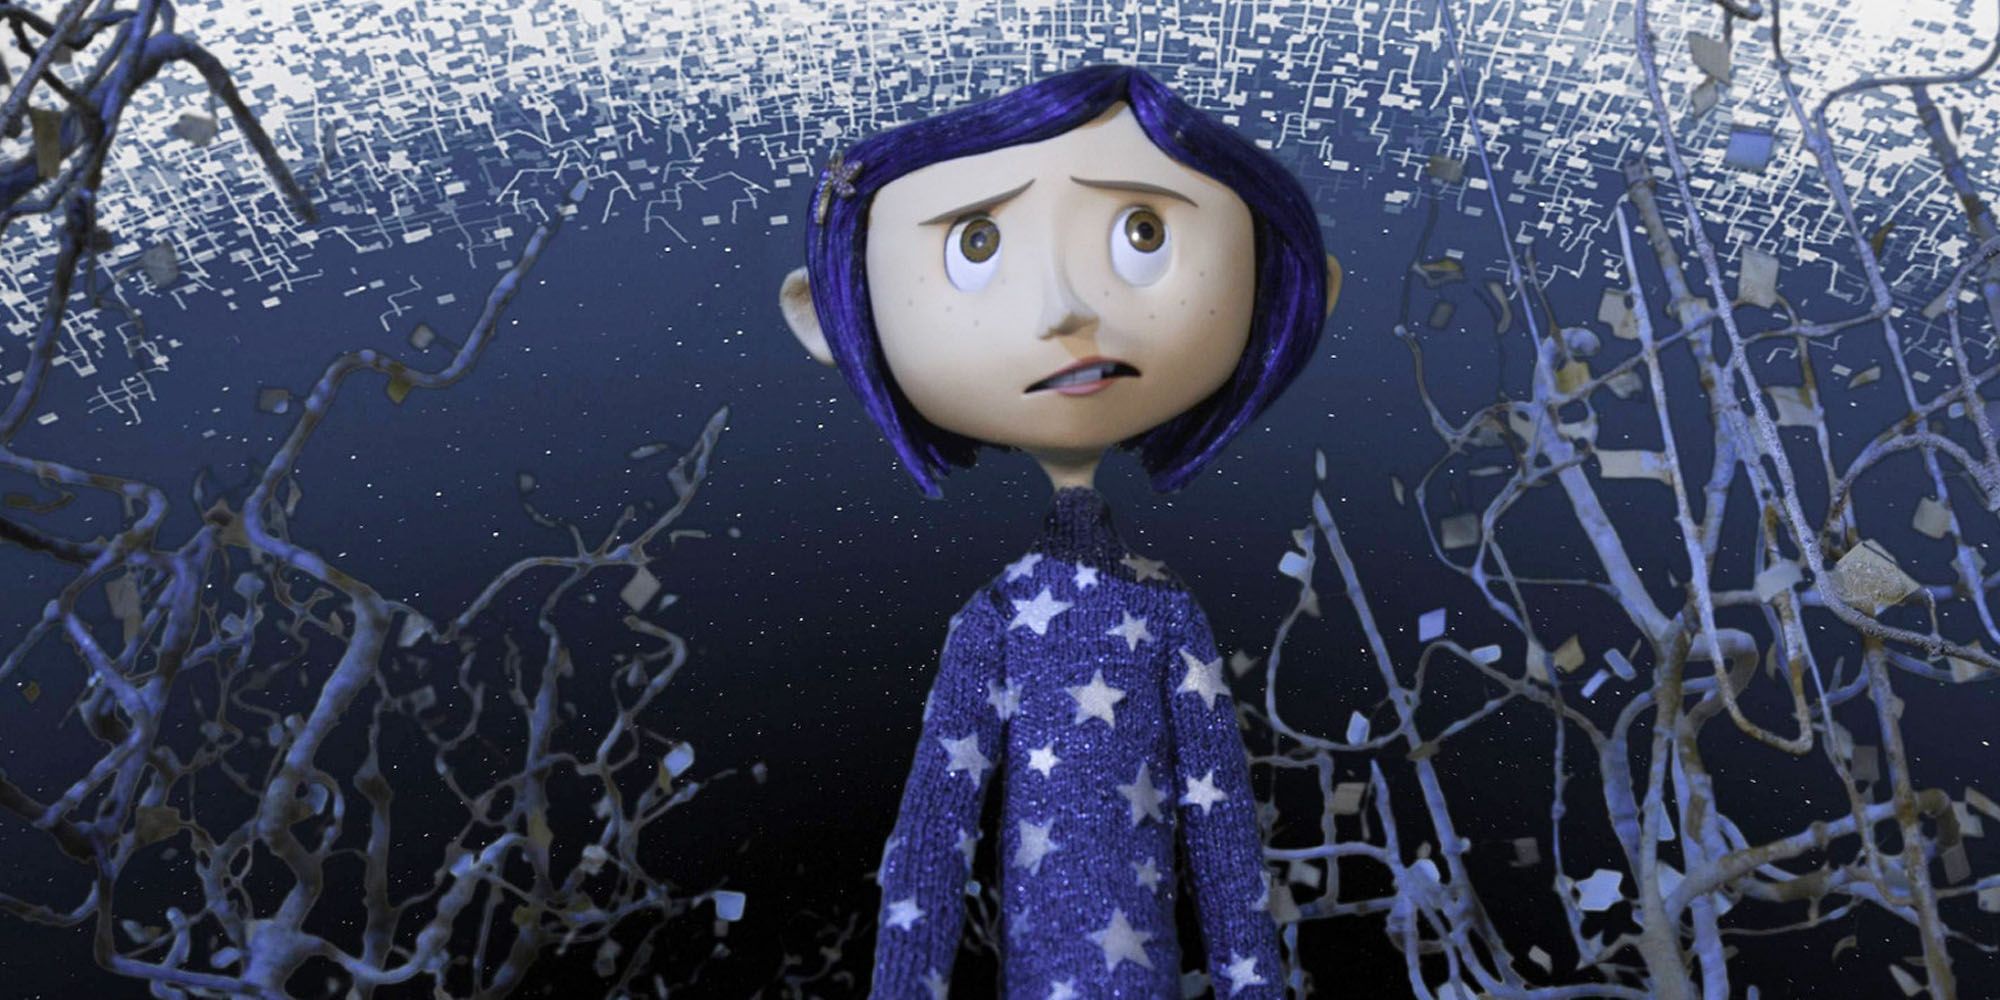 Coraline wearing a star shirt and walking fretfully through the tangled vines.